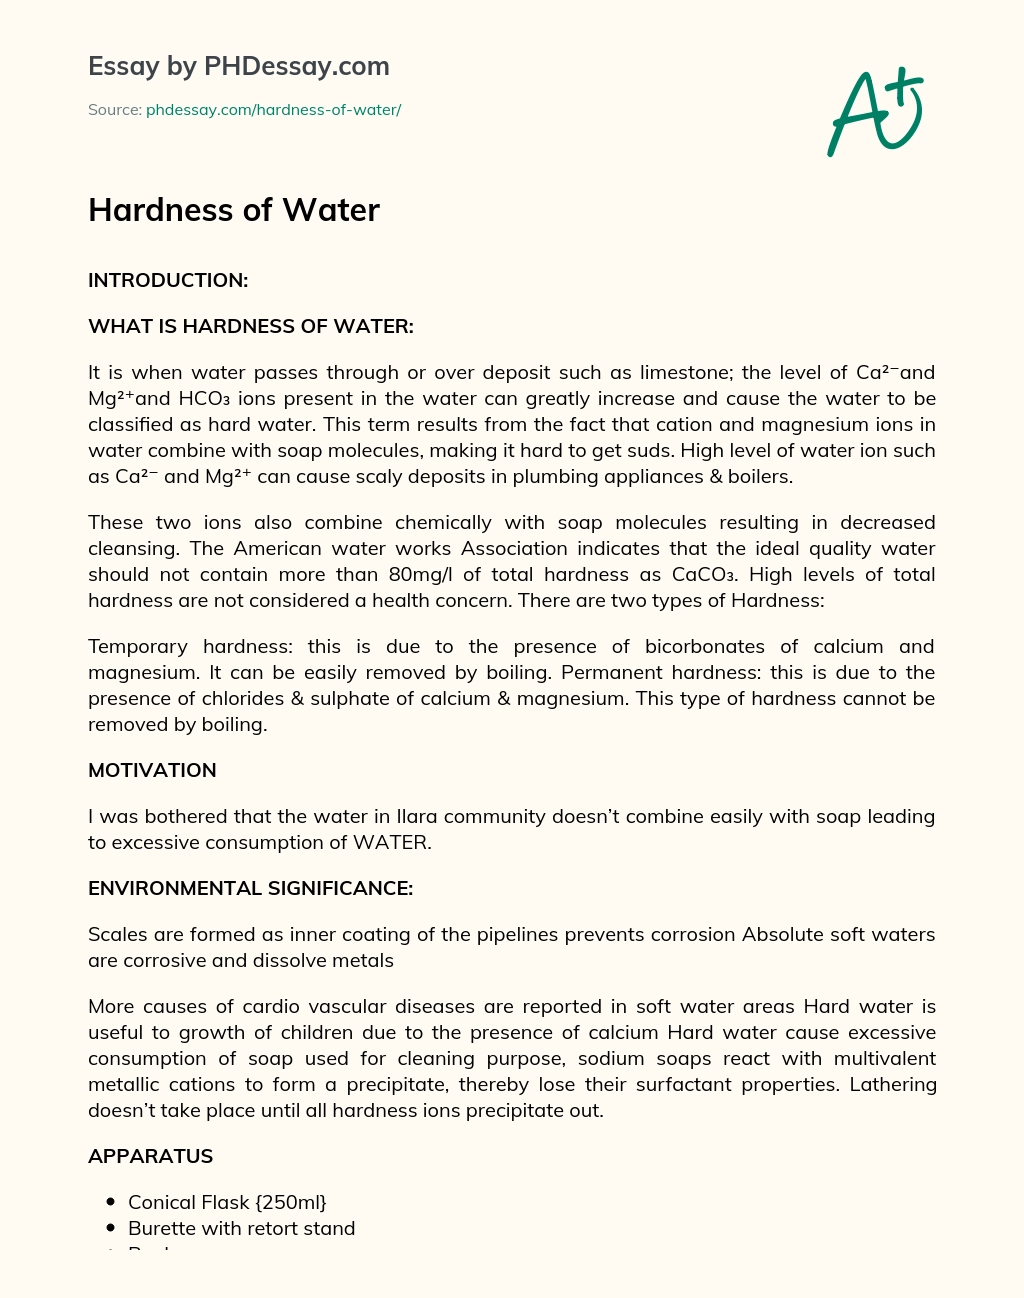 Hardness of Water essay